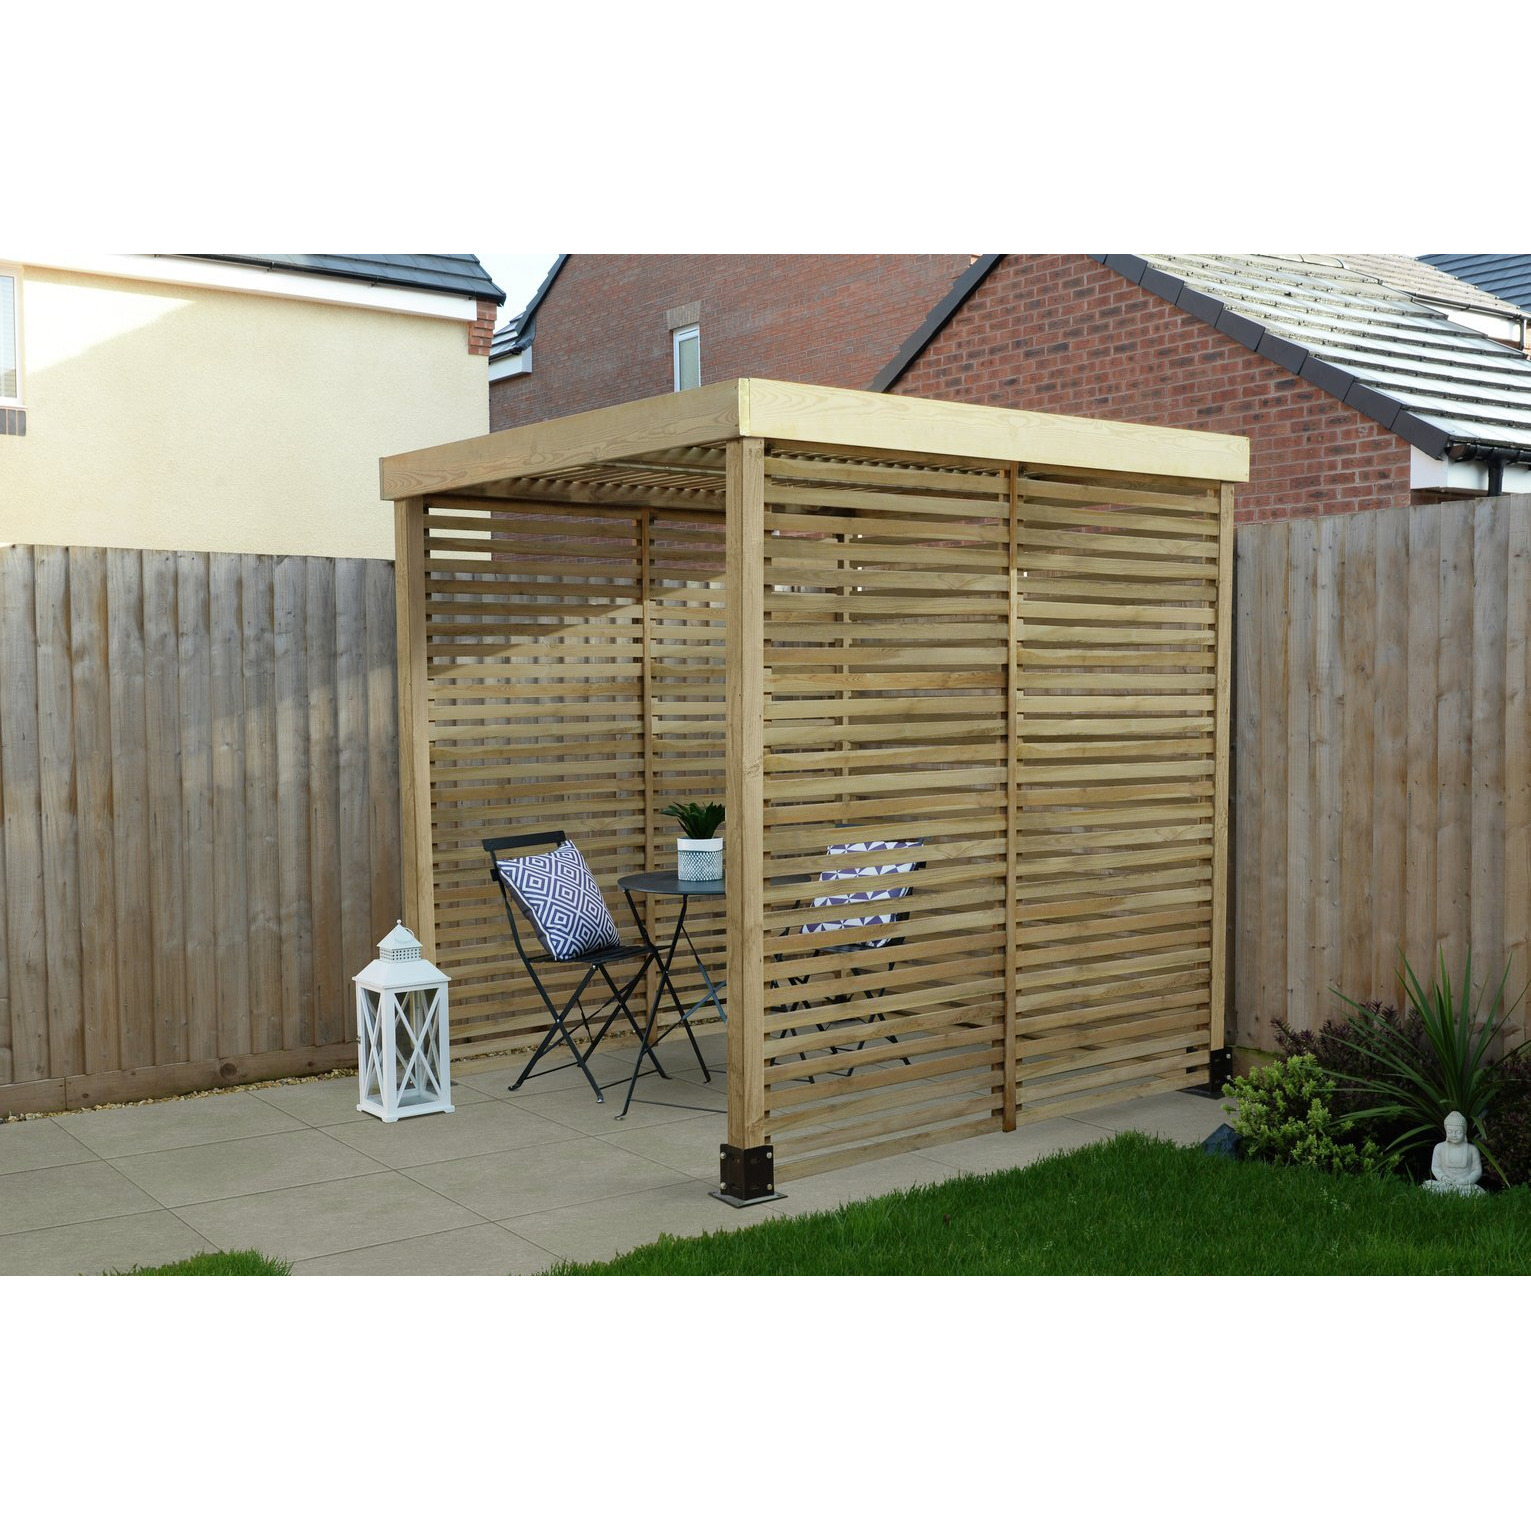 Forest Garden Modular Pergola with 3 Side Panels - image 1